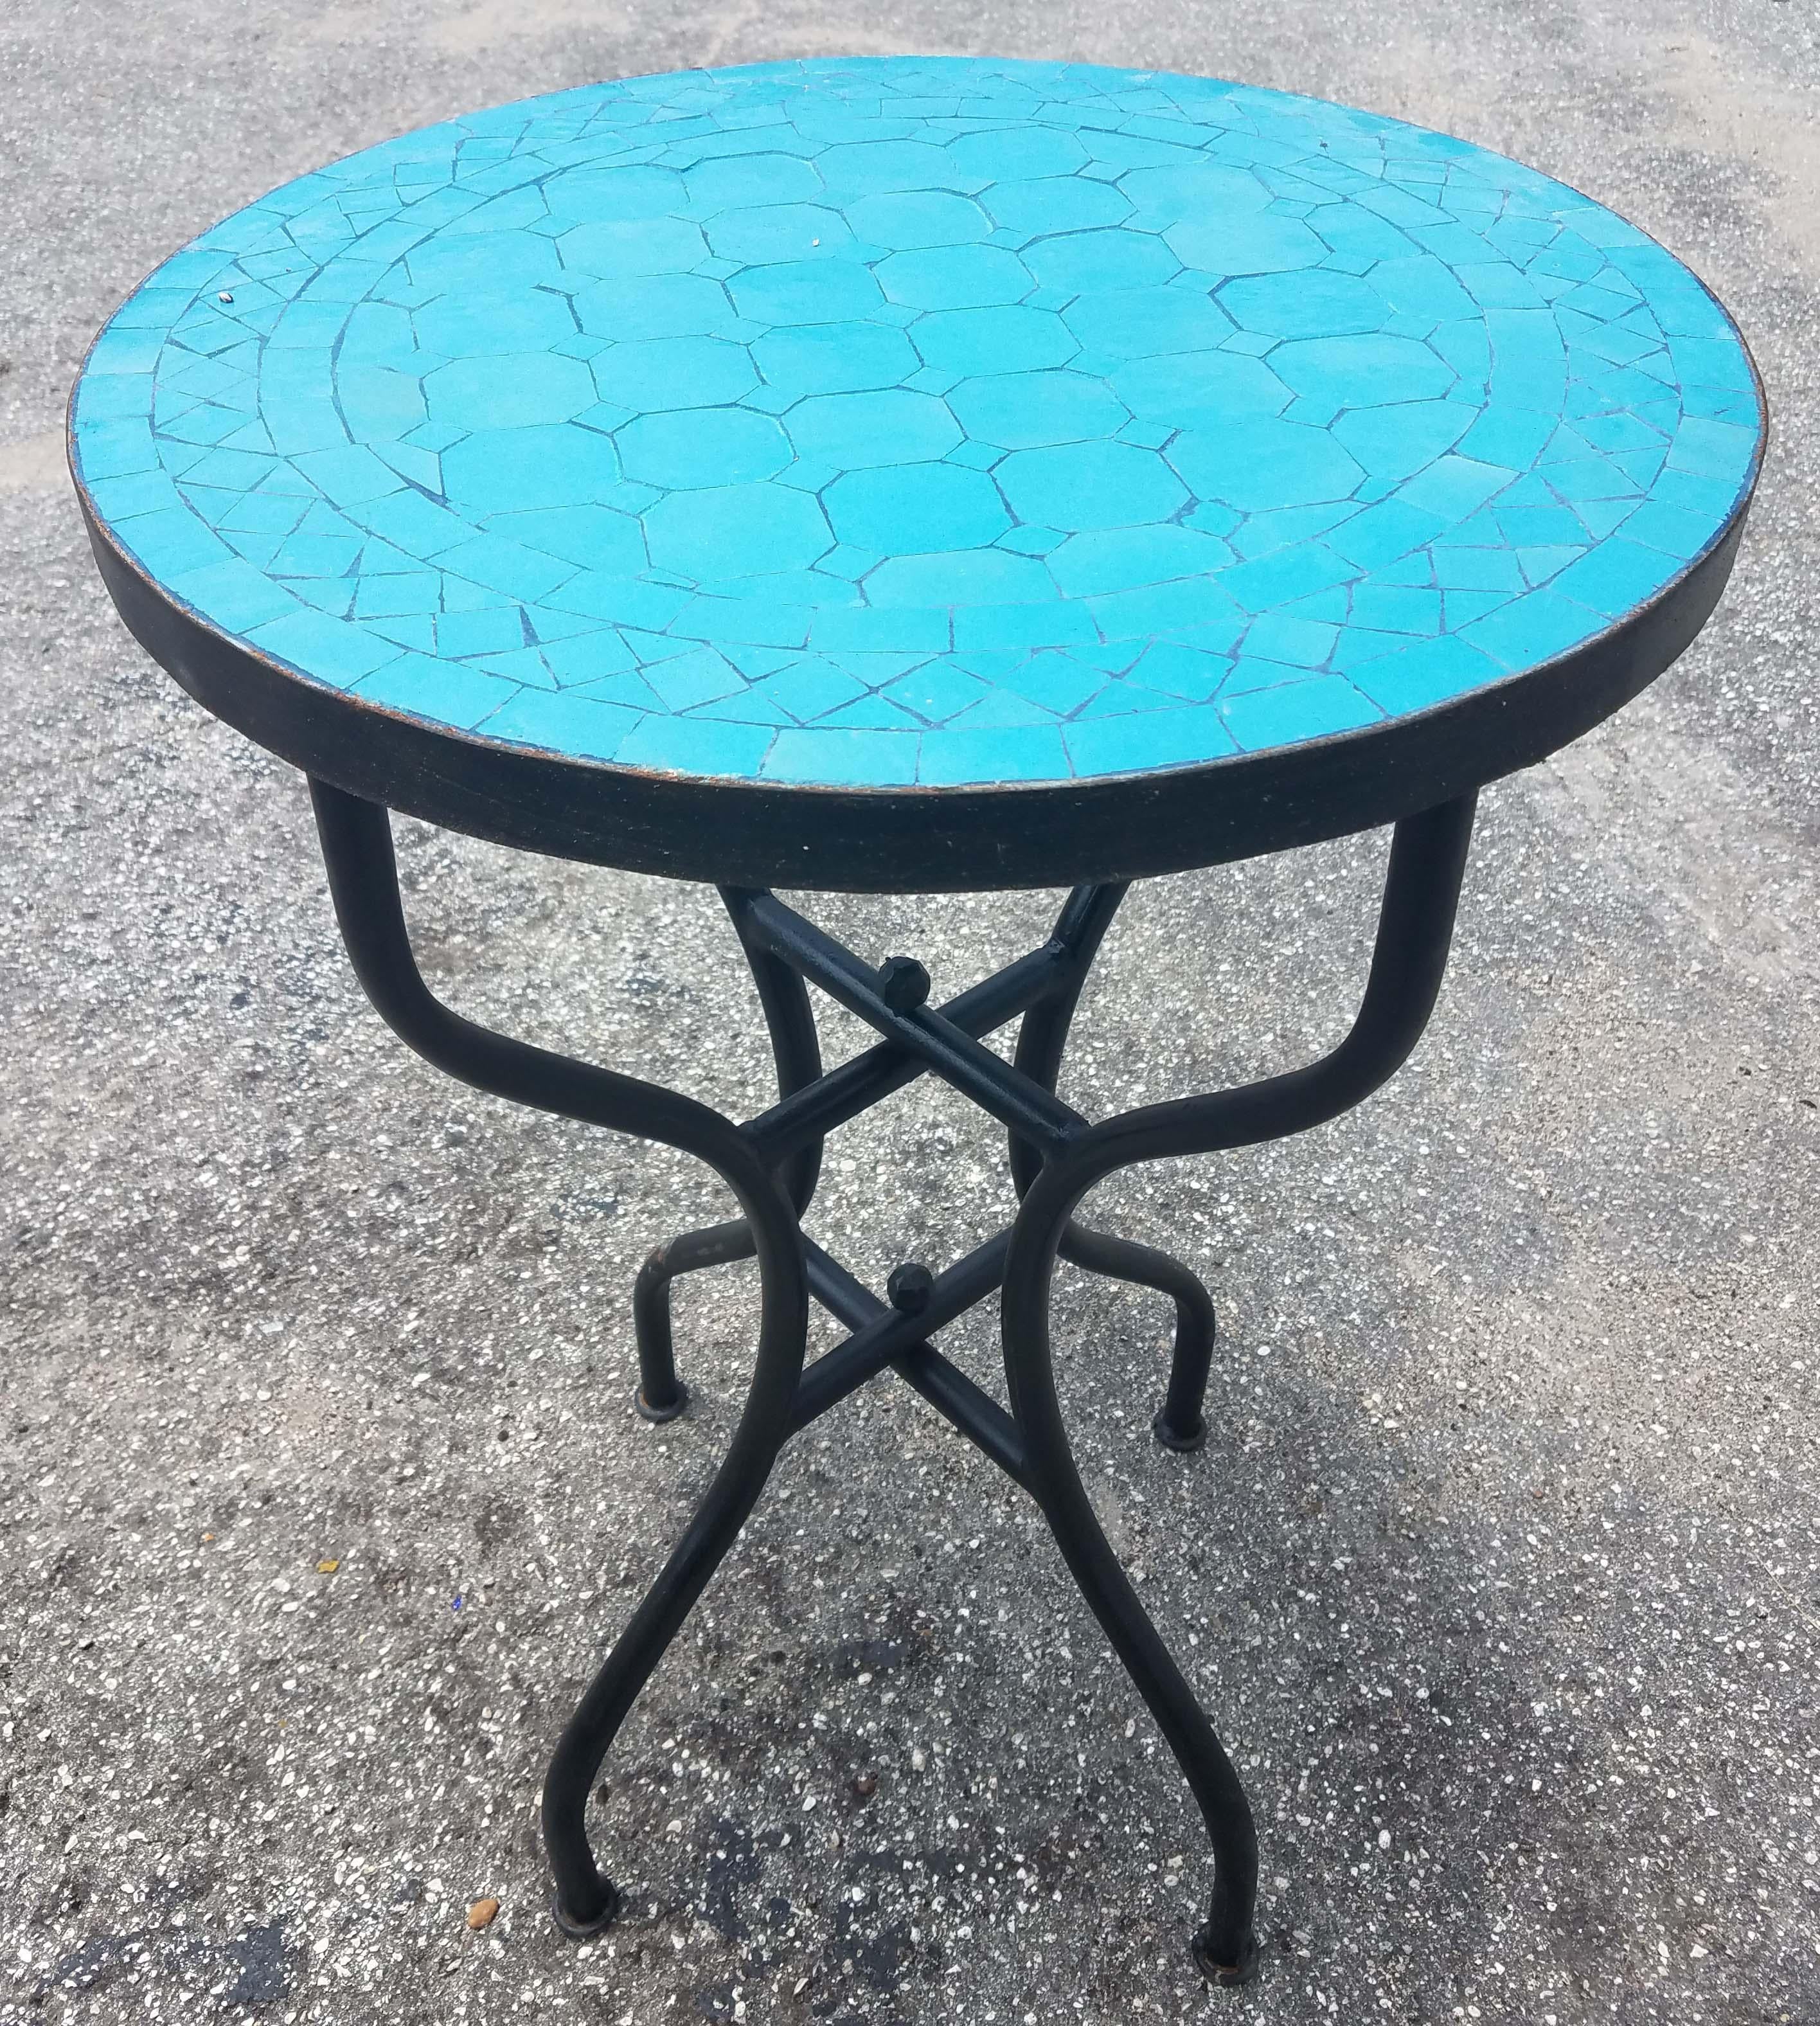 All Turquoise Moroccan Mosaic Table, CR4 In Excellent Condition For Sale In Orlando, FL